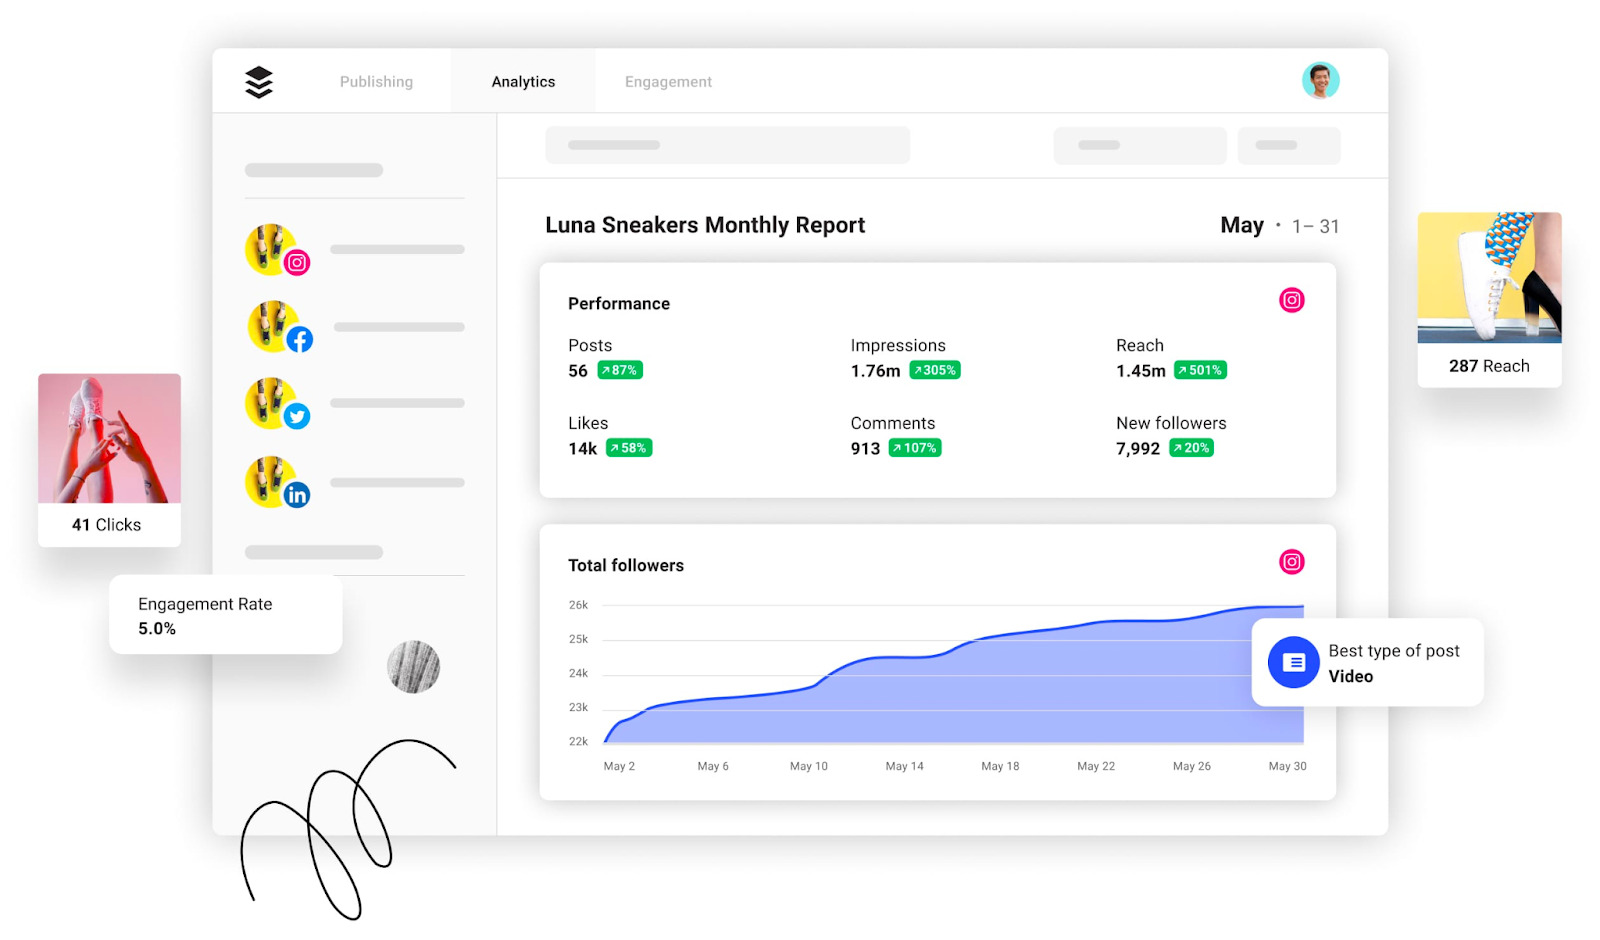 Buffer's analytics tool. It's a "Luna Sneakers Monthly Report" with their performance metrics such us the number of posts, impressions, reach, and new followers. 